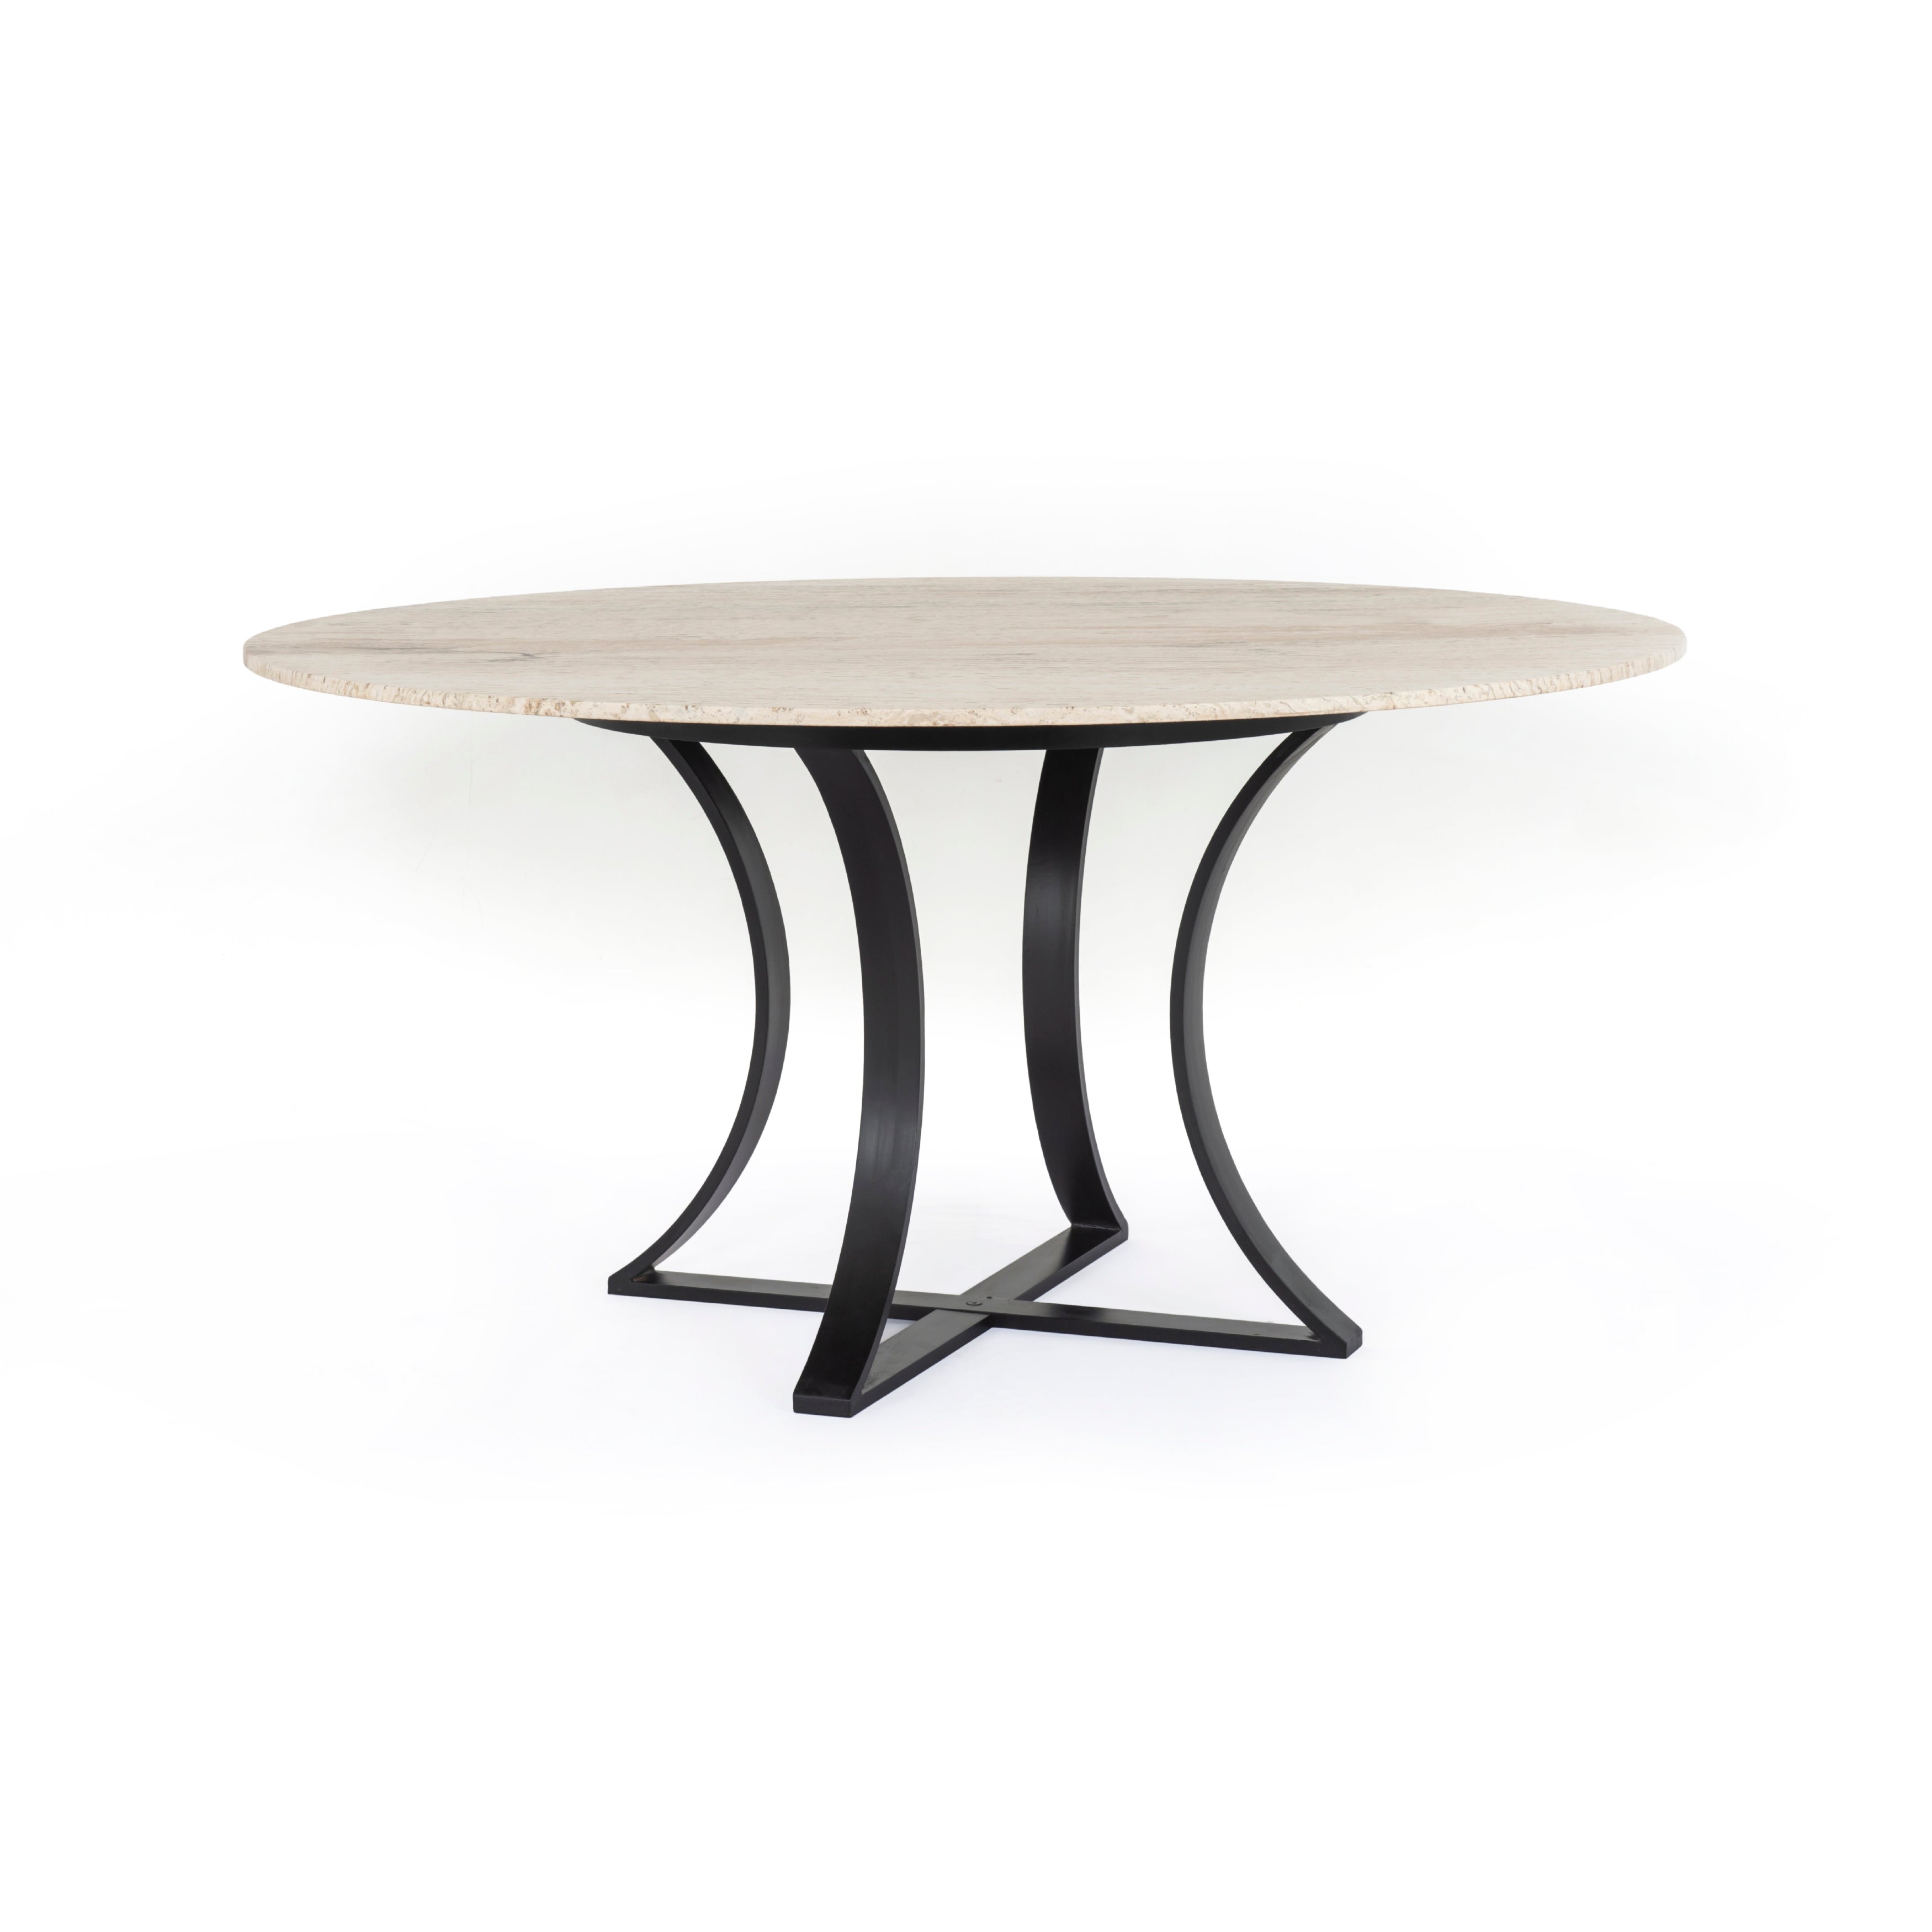 Natural materials take a cue from modern geometry with this Gage Dining Table - White Travertine. Black-finished iron forms unique angles to balance a contrasting tabletop of beautiful white travertine. Seats six to eight comfortably.